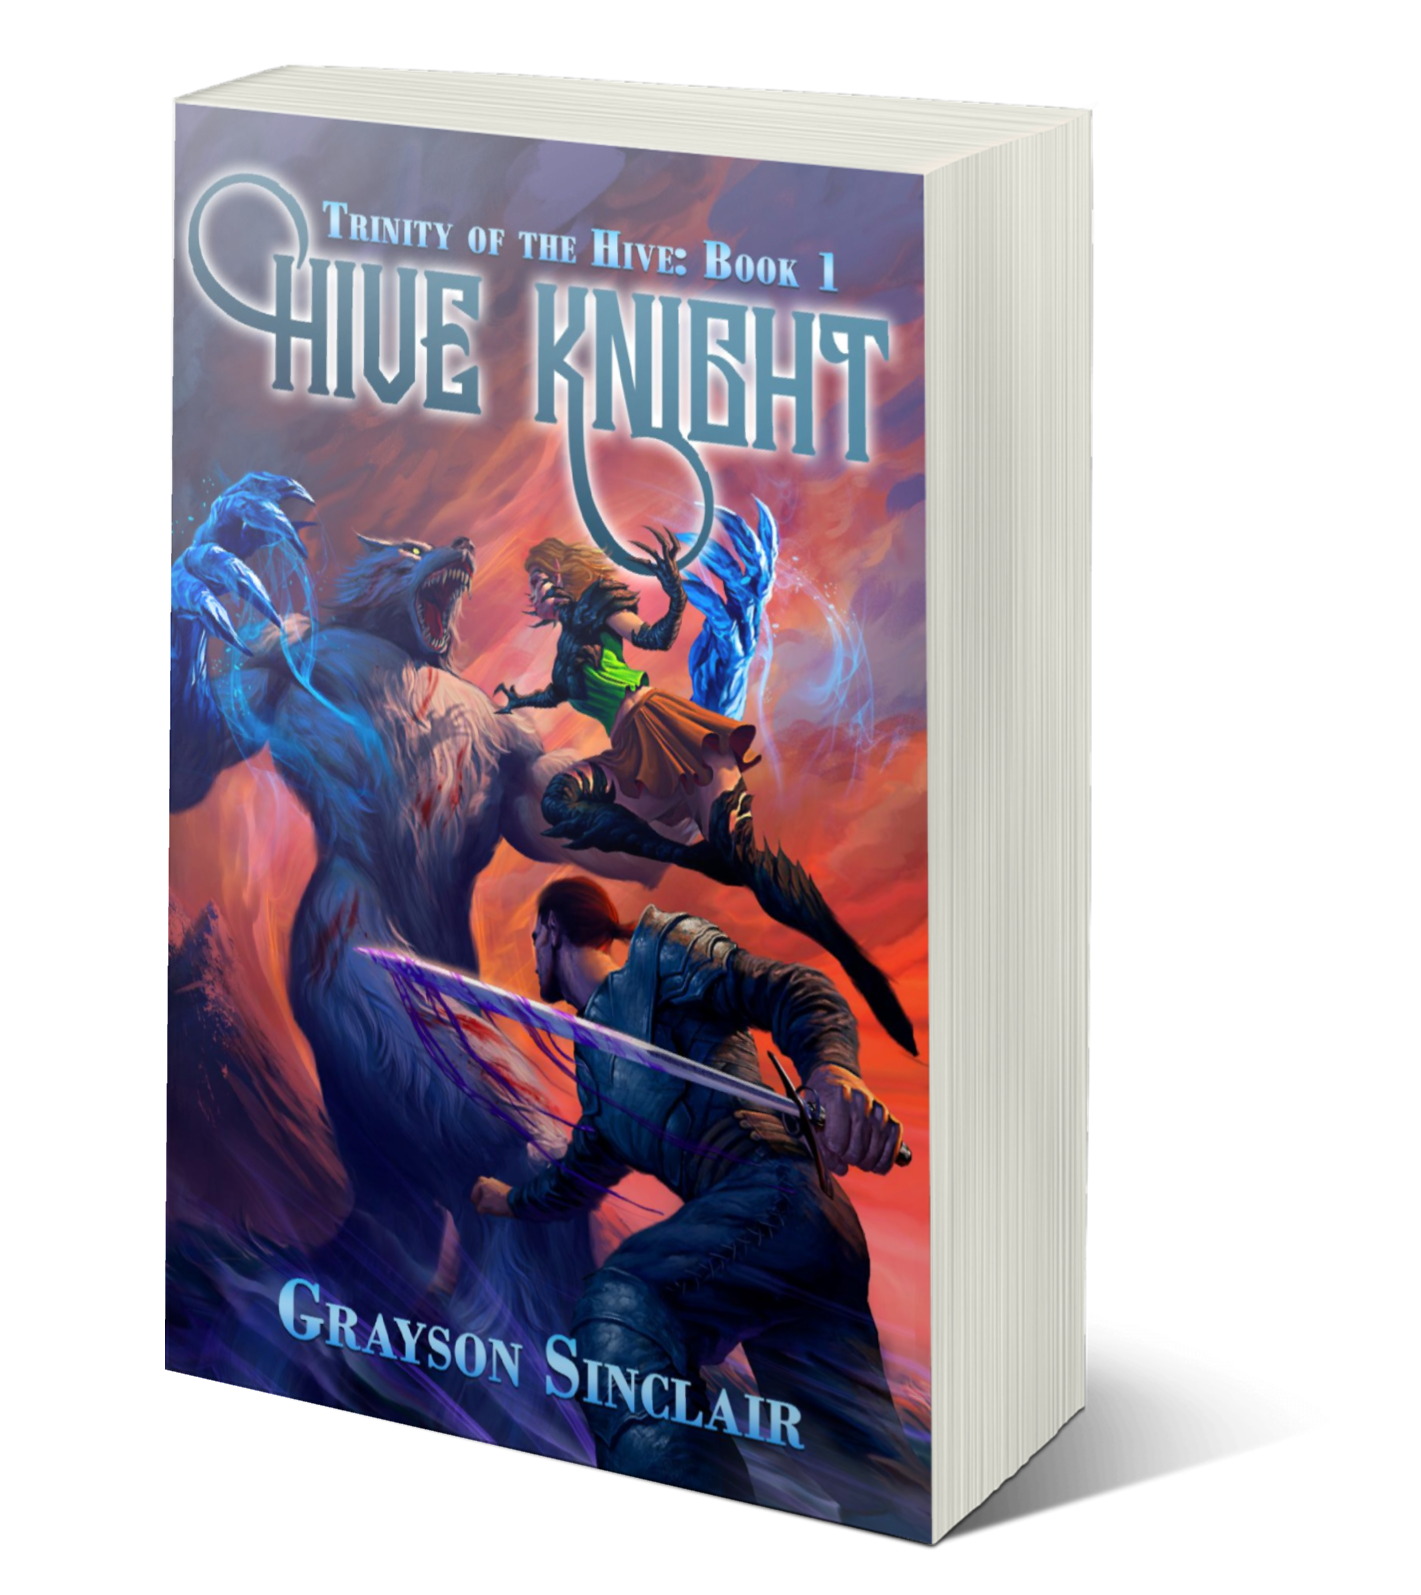 Hive Knight (Trinity of the Hive #1)